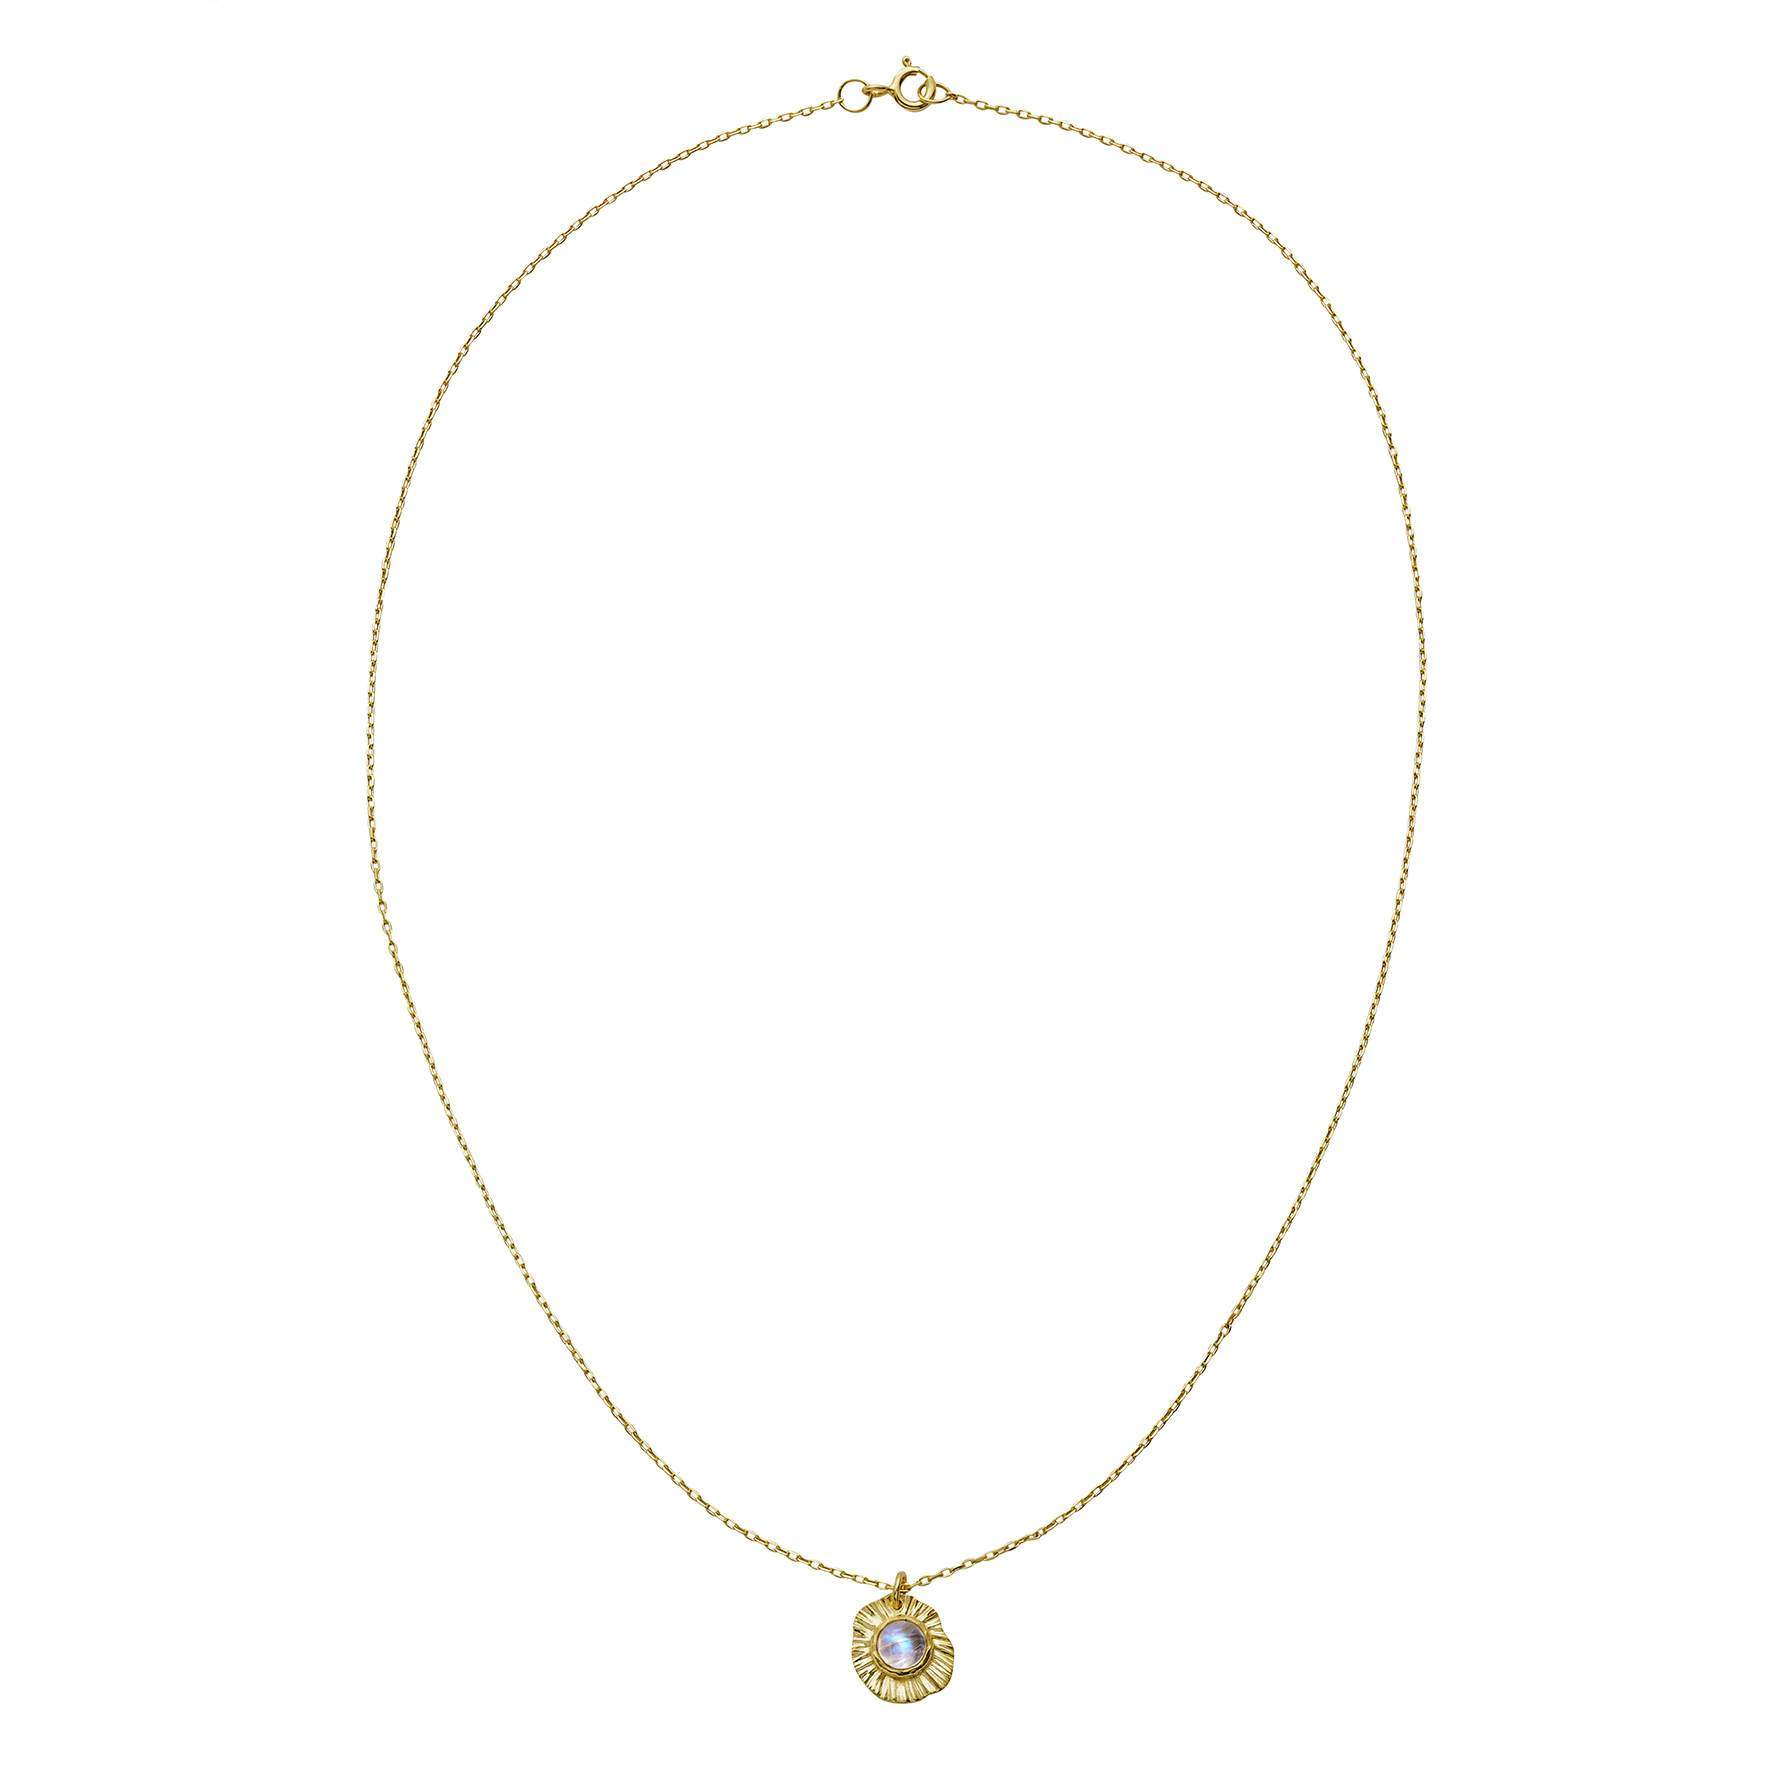 Astra Necklace from Maanesten in Goldplated-Silver Sterling 925